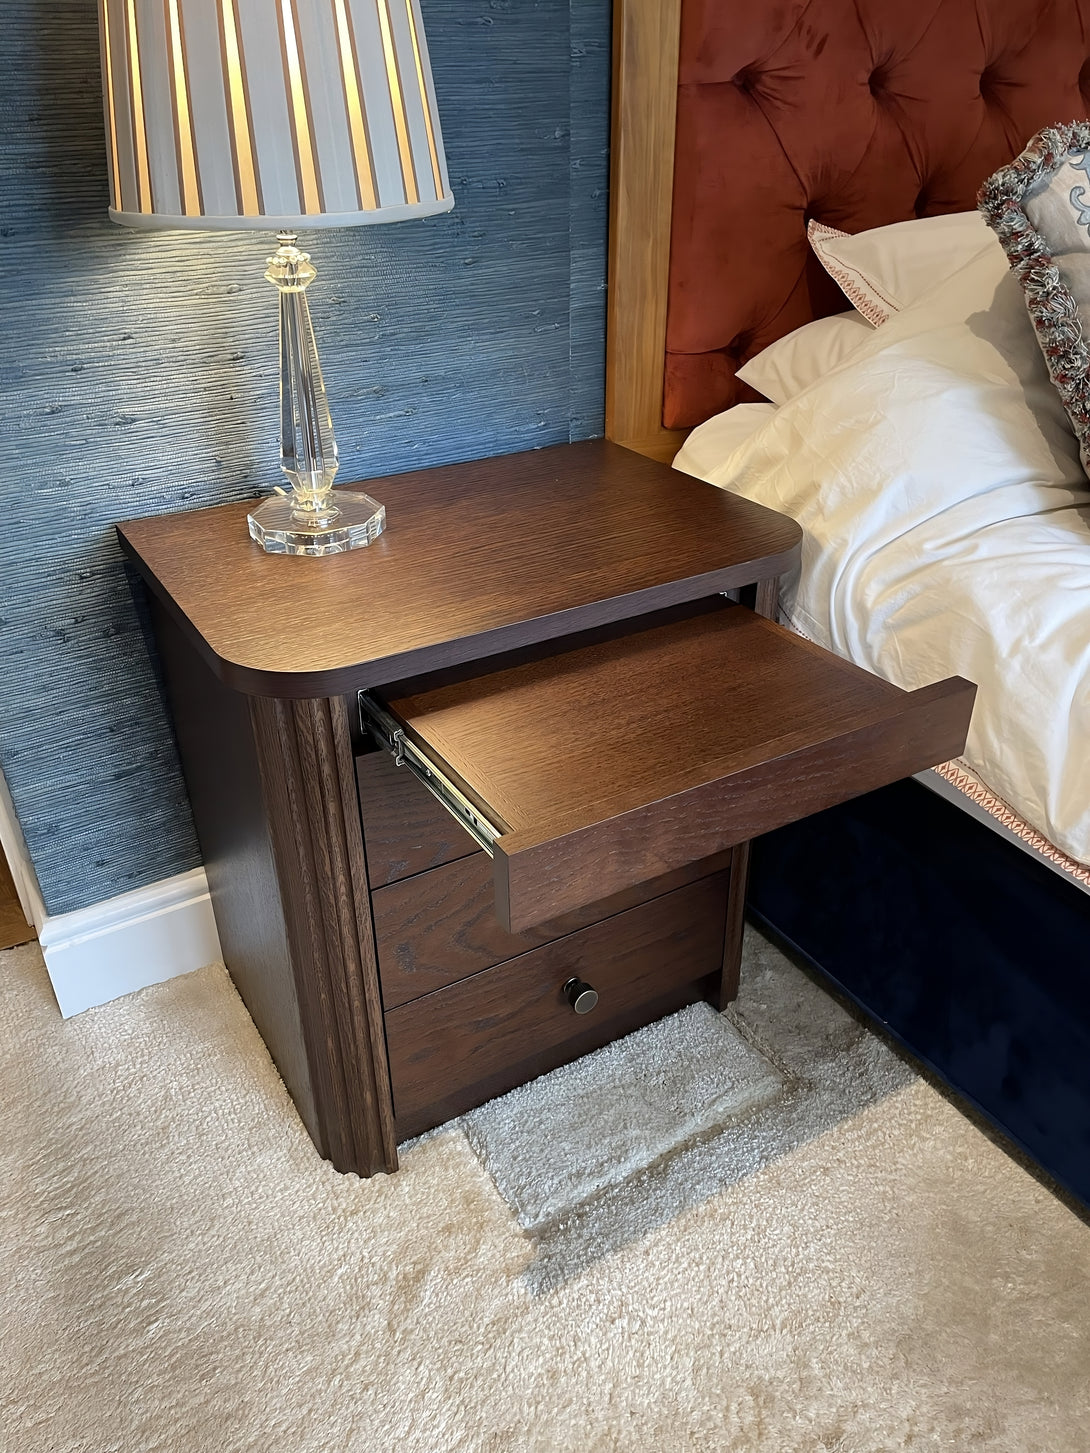 Dressing Area and Bedside Tables